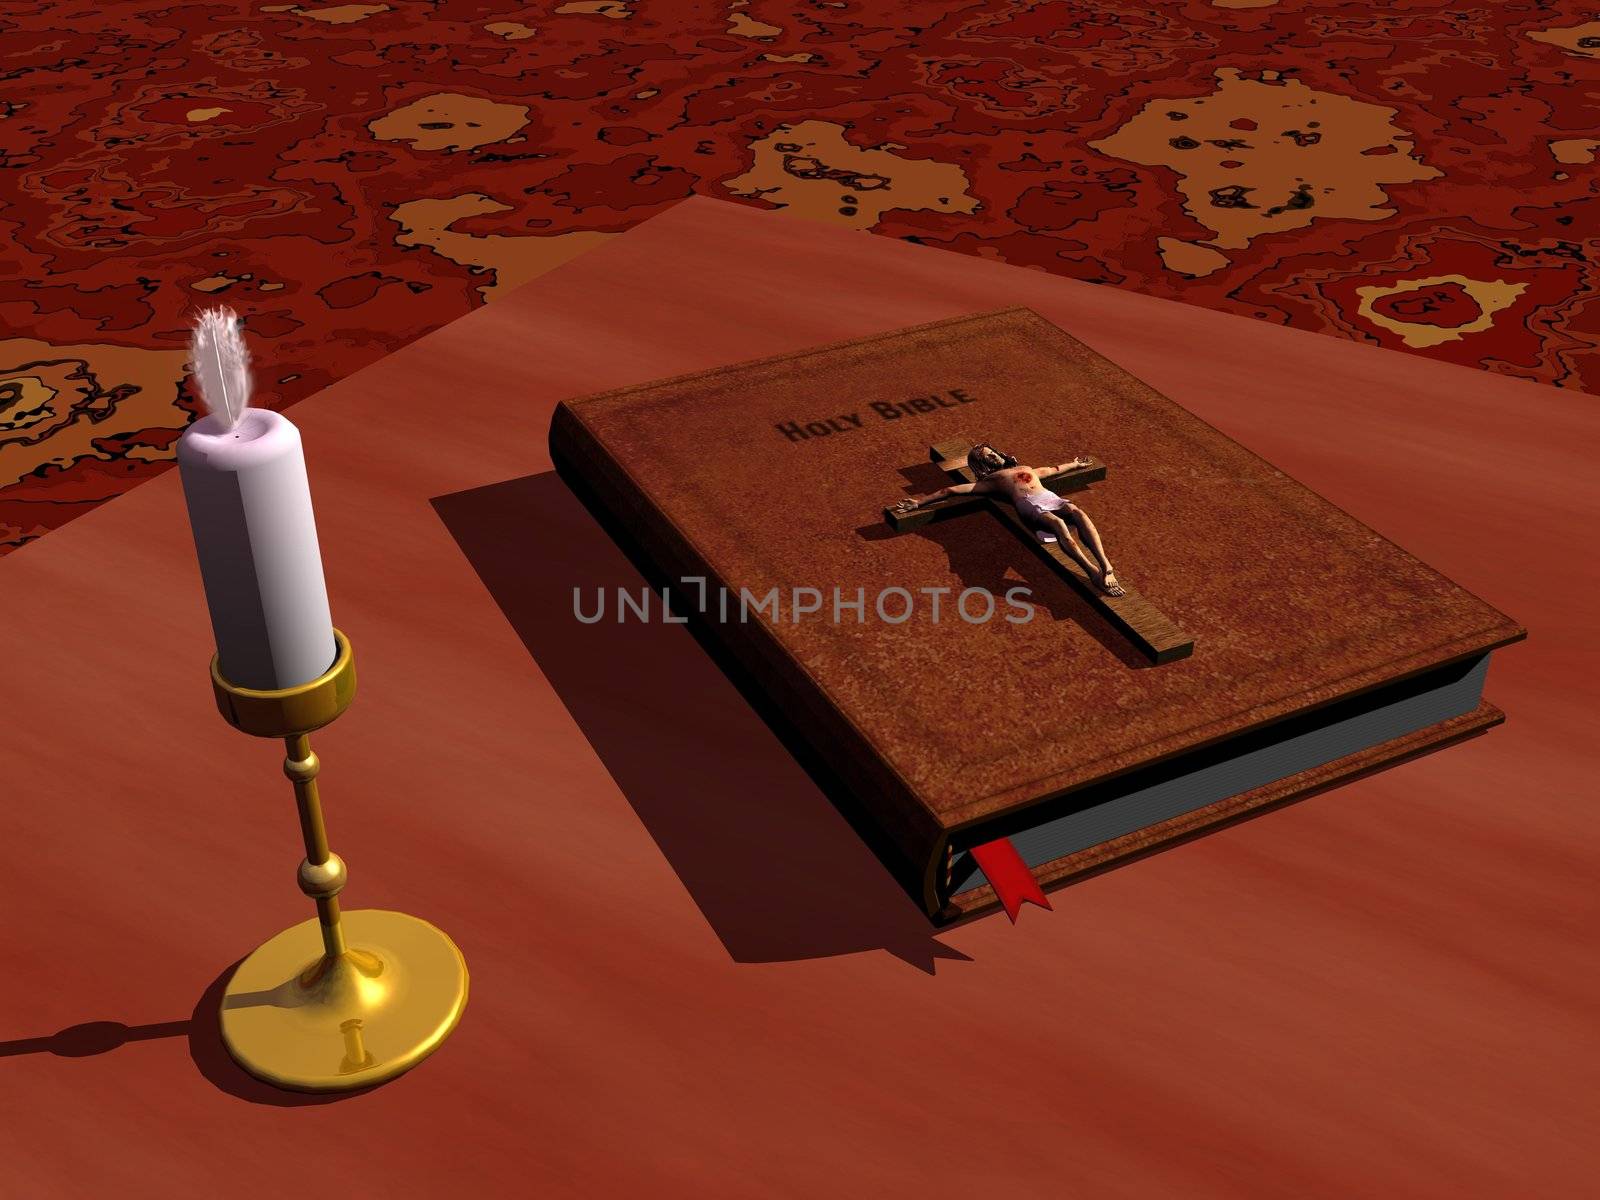 Bible with Jesus cross on it on a table next to a candle